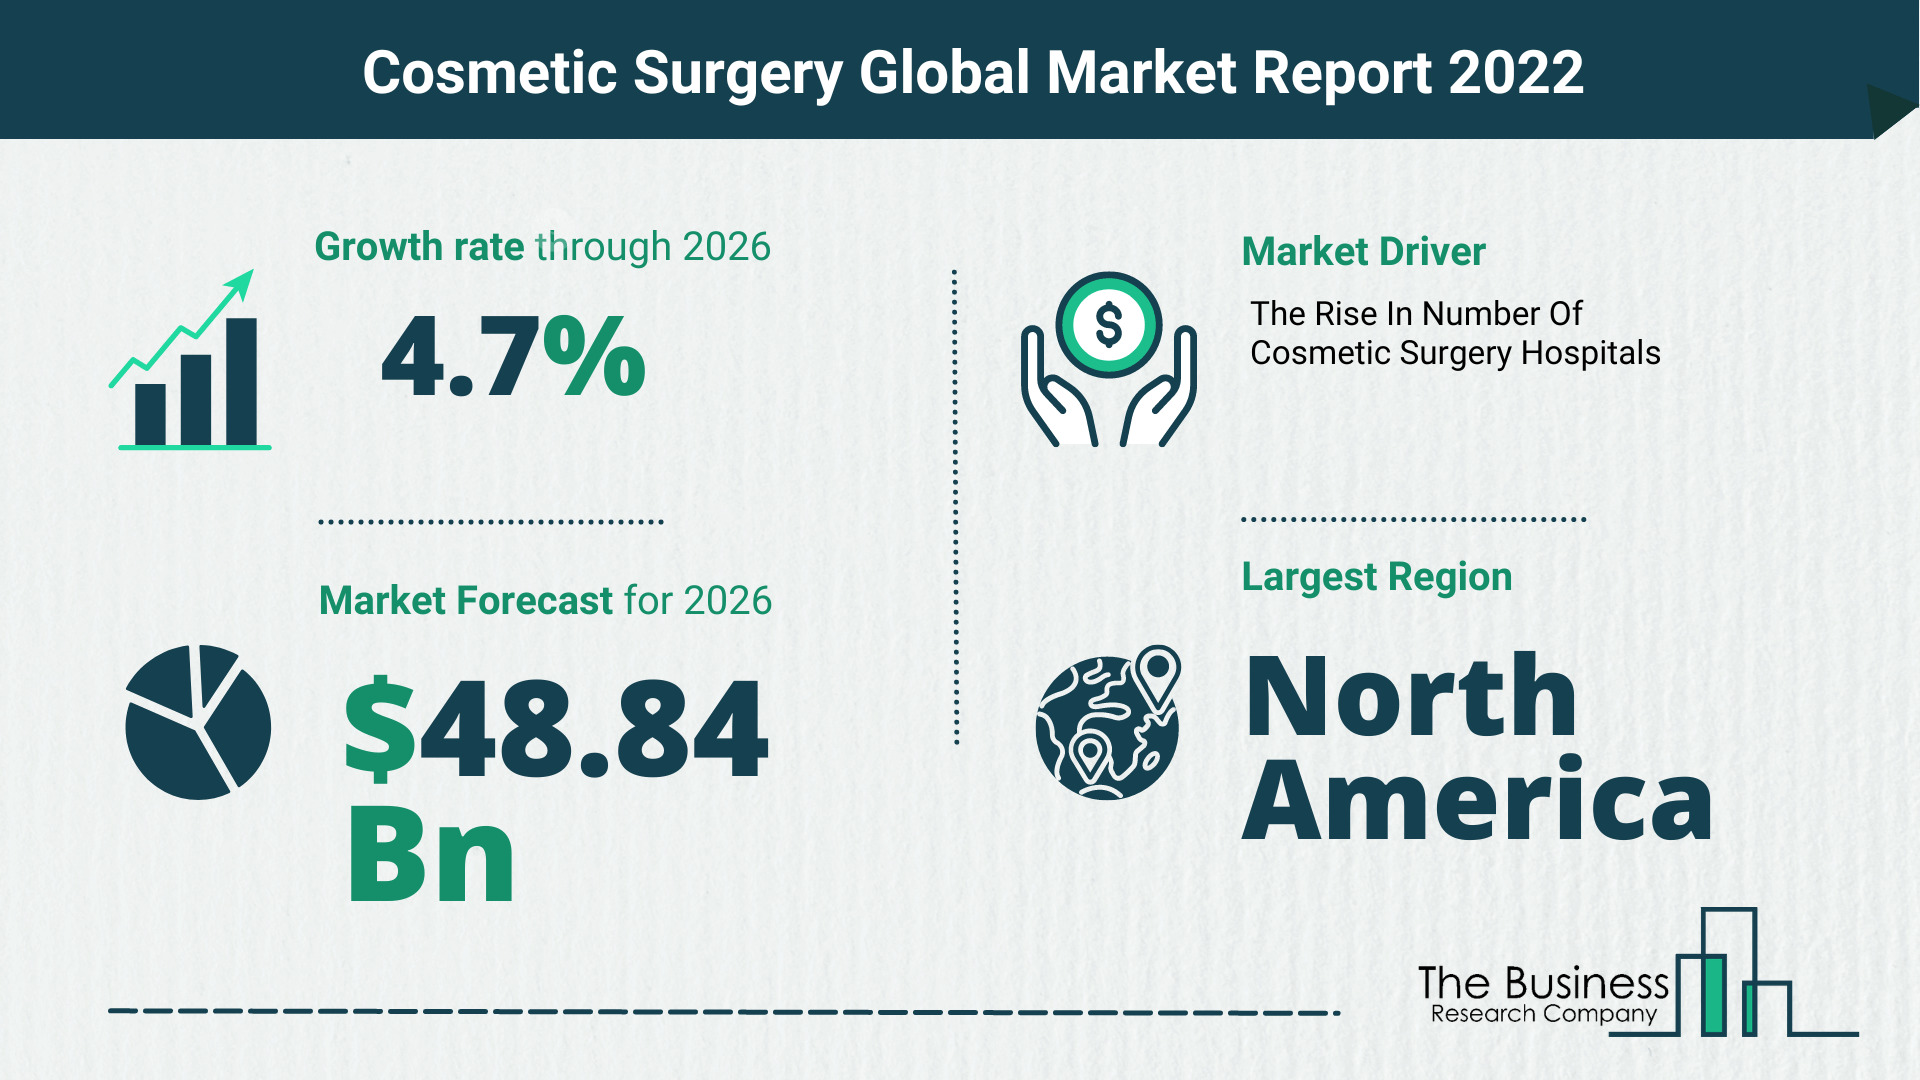 What Is The Cosmetic Surgery Market Overview In 2022?